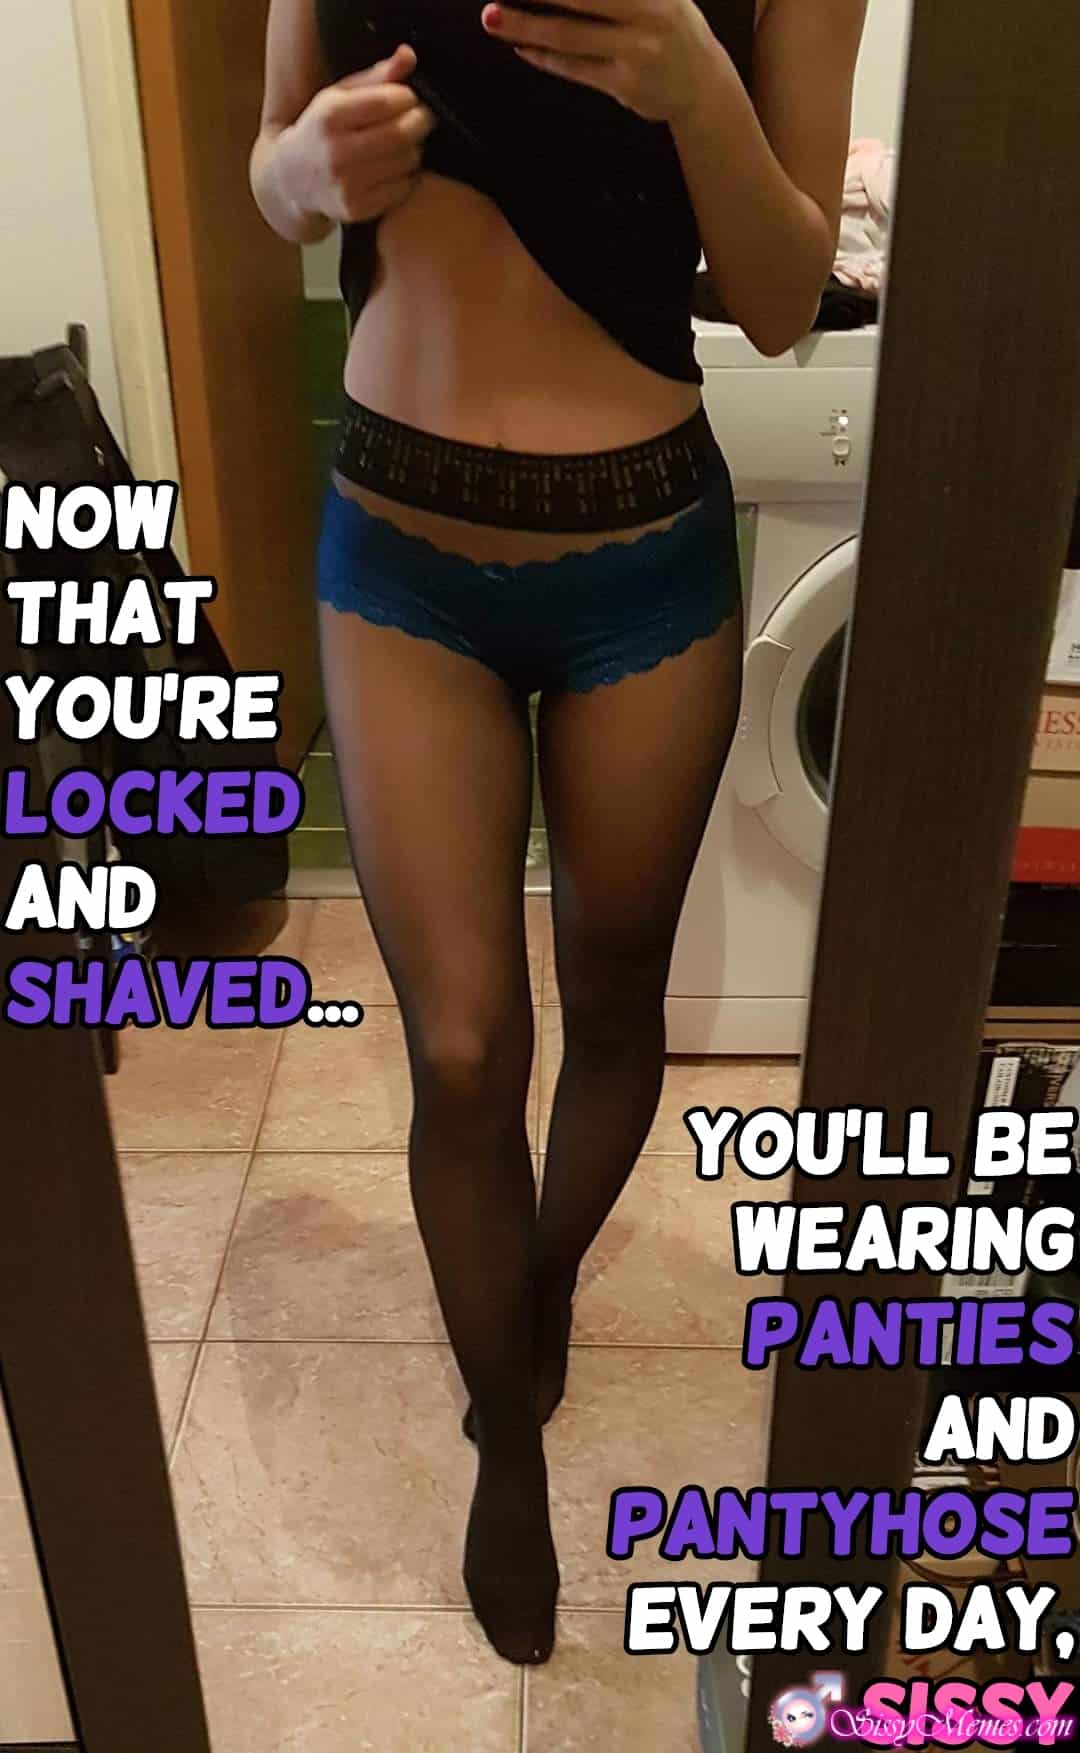 Training My Favorite Hypno Feminization Femboy hotwife caption: NOW THAT YOU’RE LOCKED AND SHAVED… ES YOU’LL BE WEARING PANTIES AND PANTYHOSE EVERY DAY, SISSY Cd Tries on Female Pantyhose